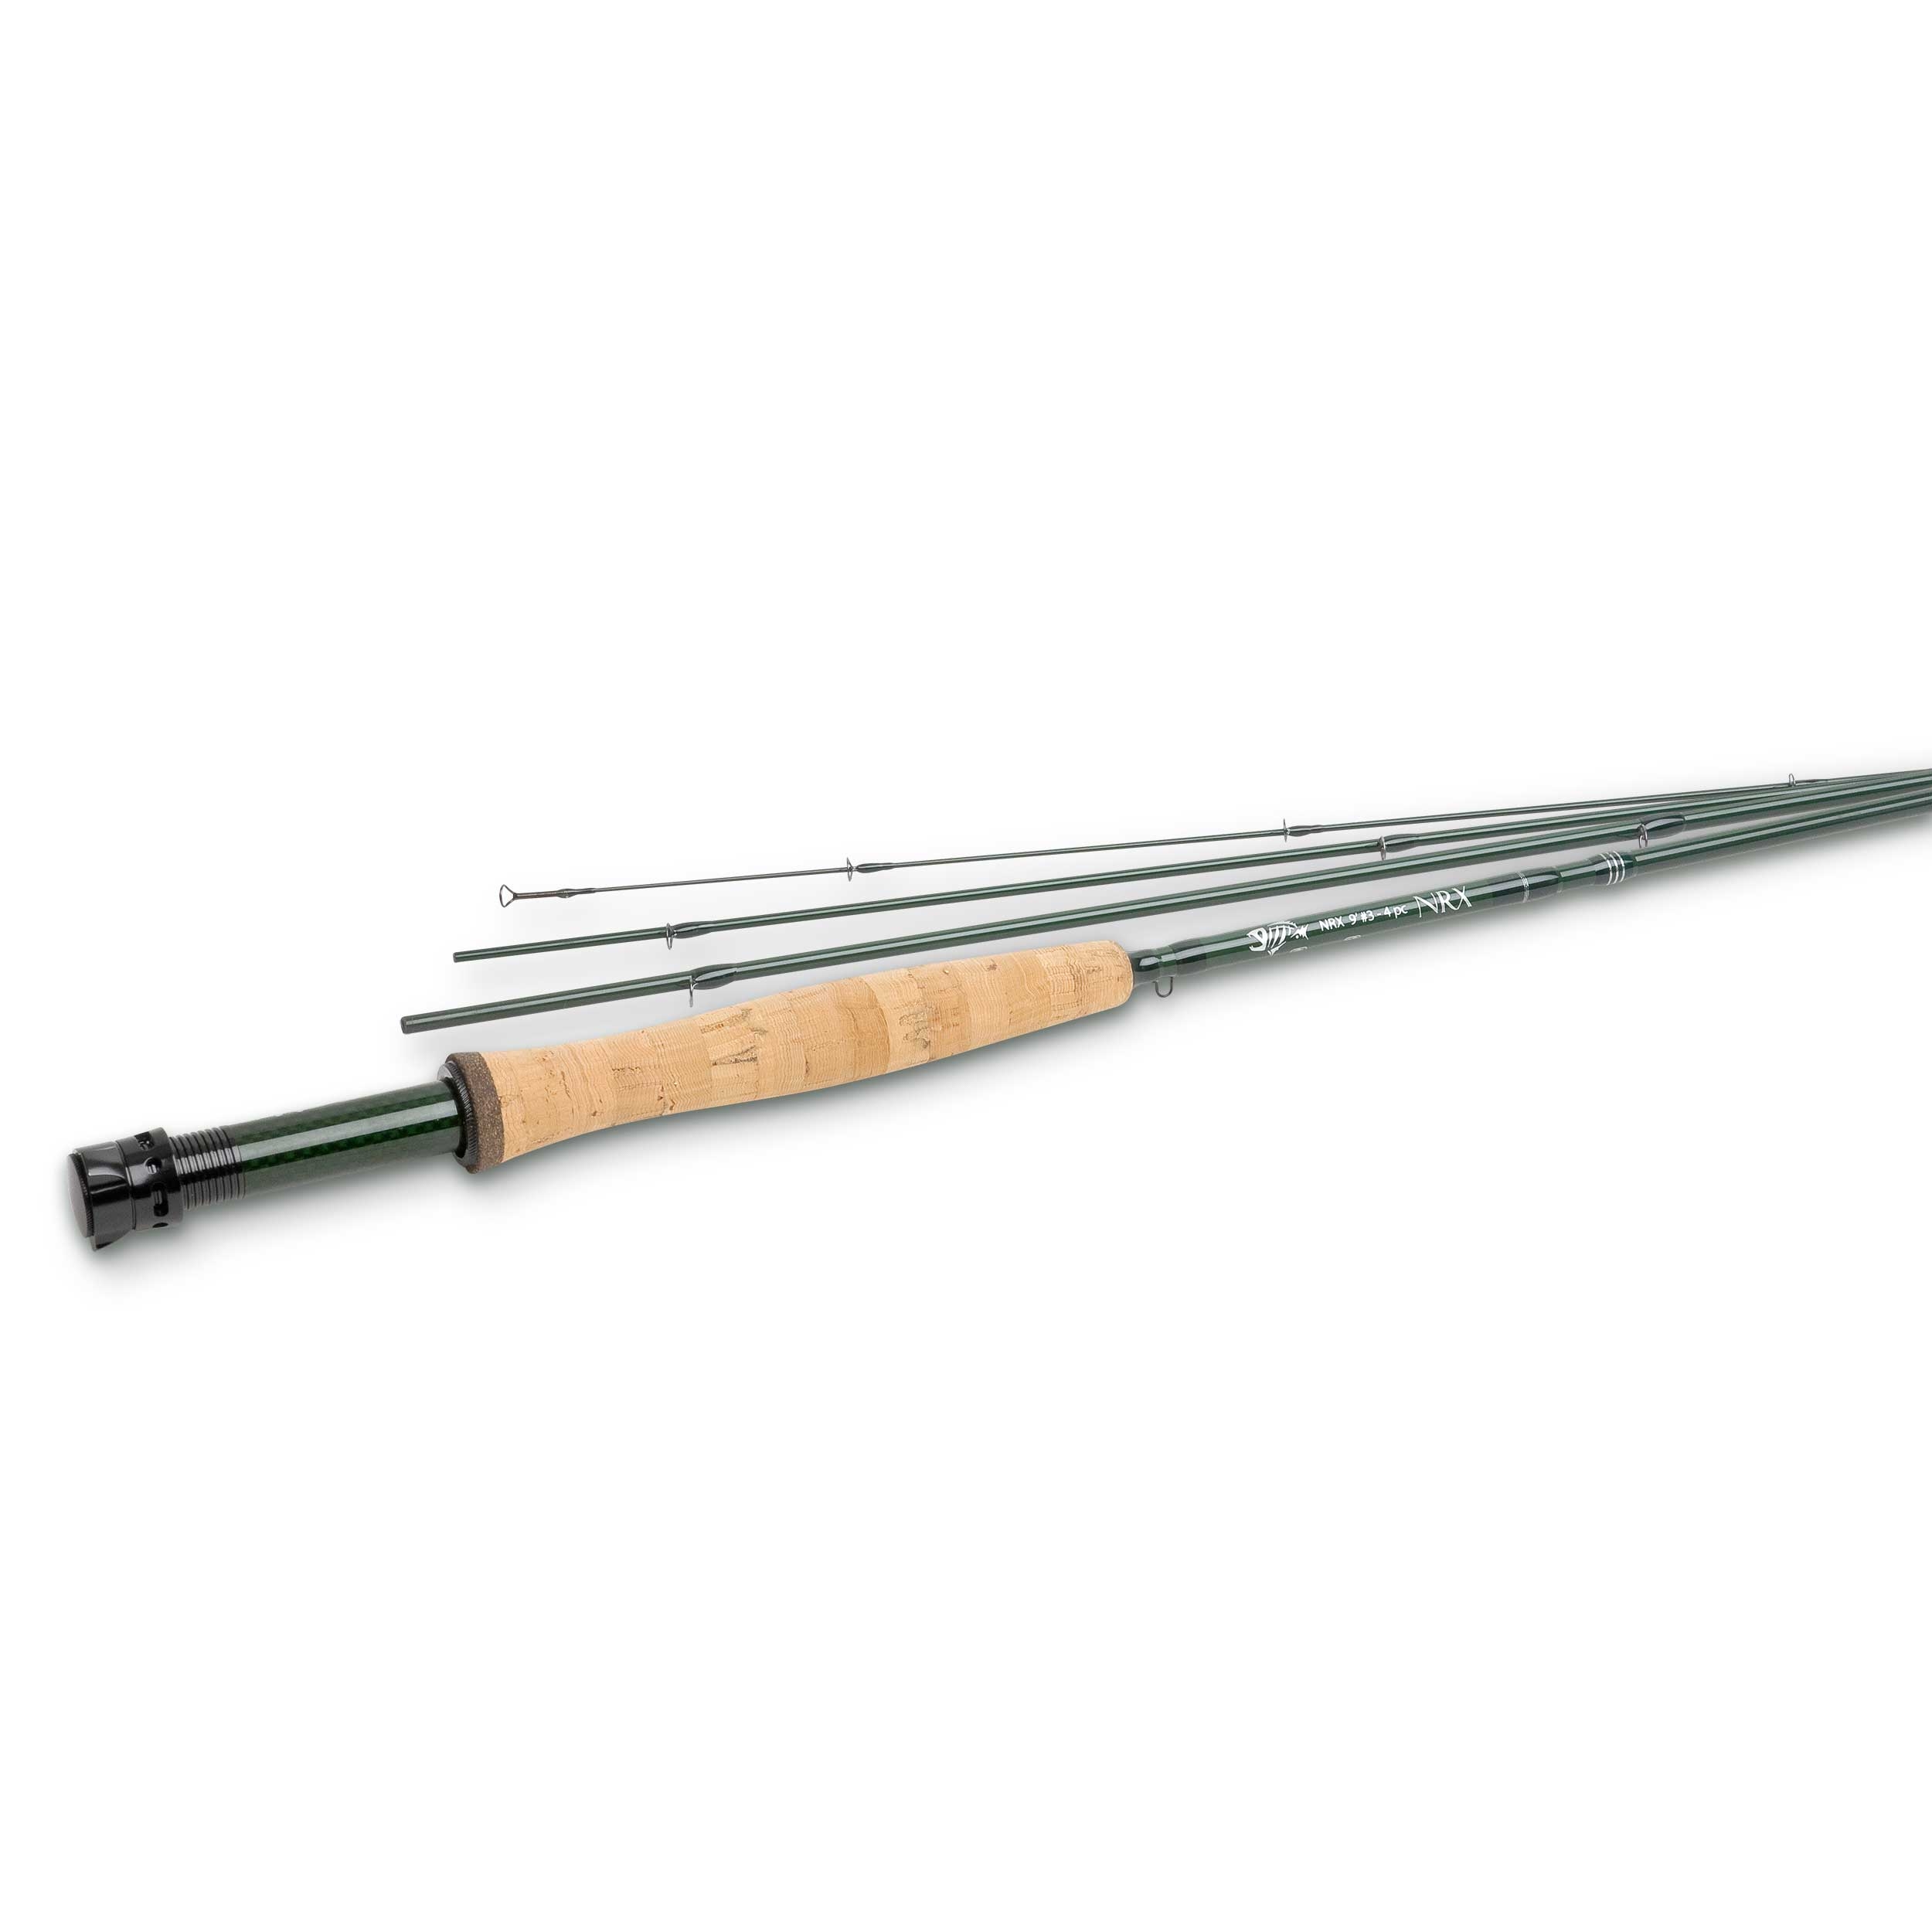 G Loomis NRX Performance Trout Fly Rod